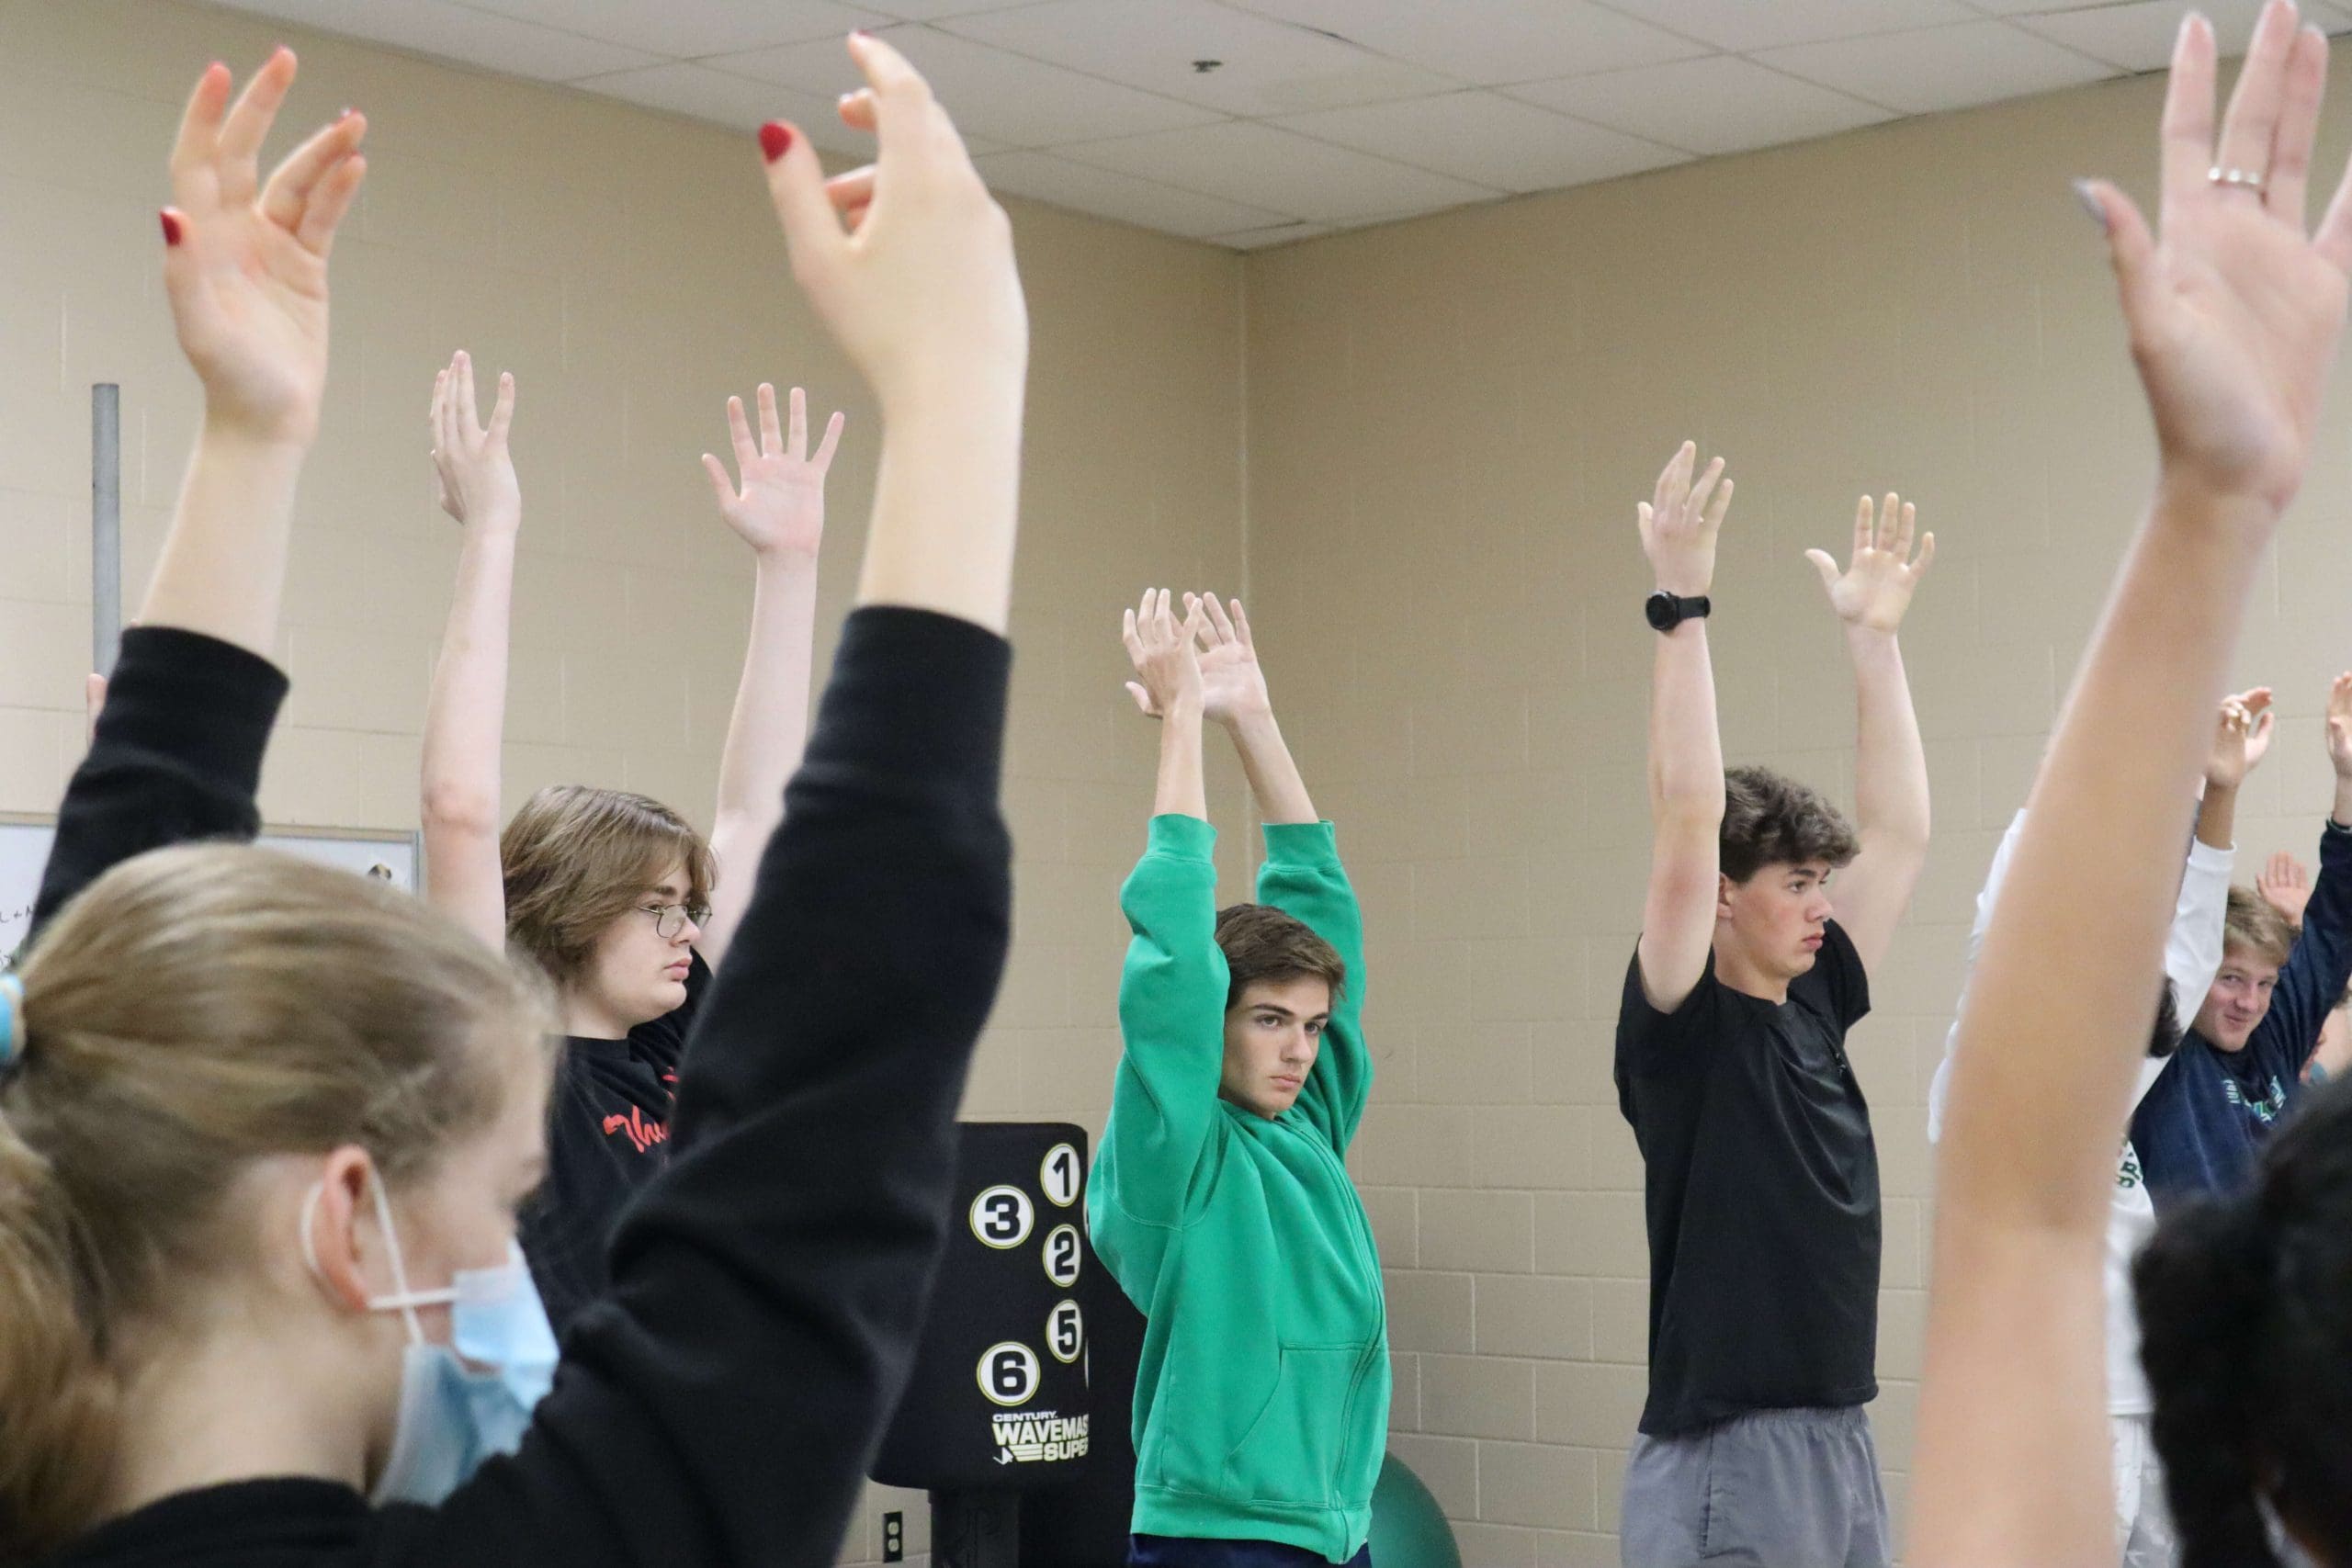 Students reach arms overhead during a yoga lesson in physical education class.